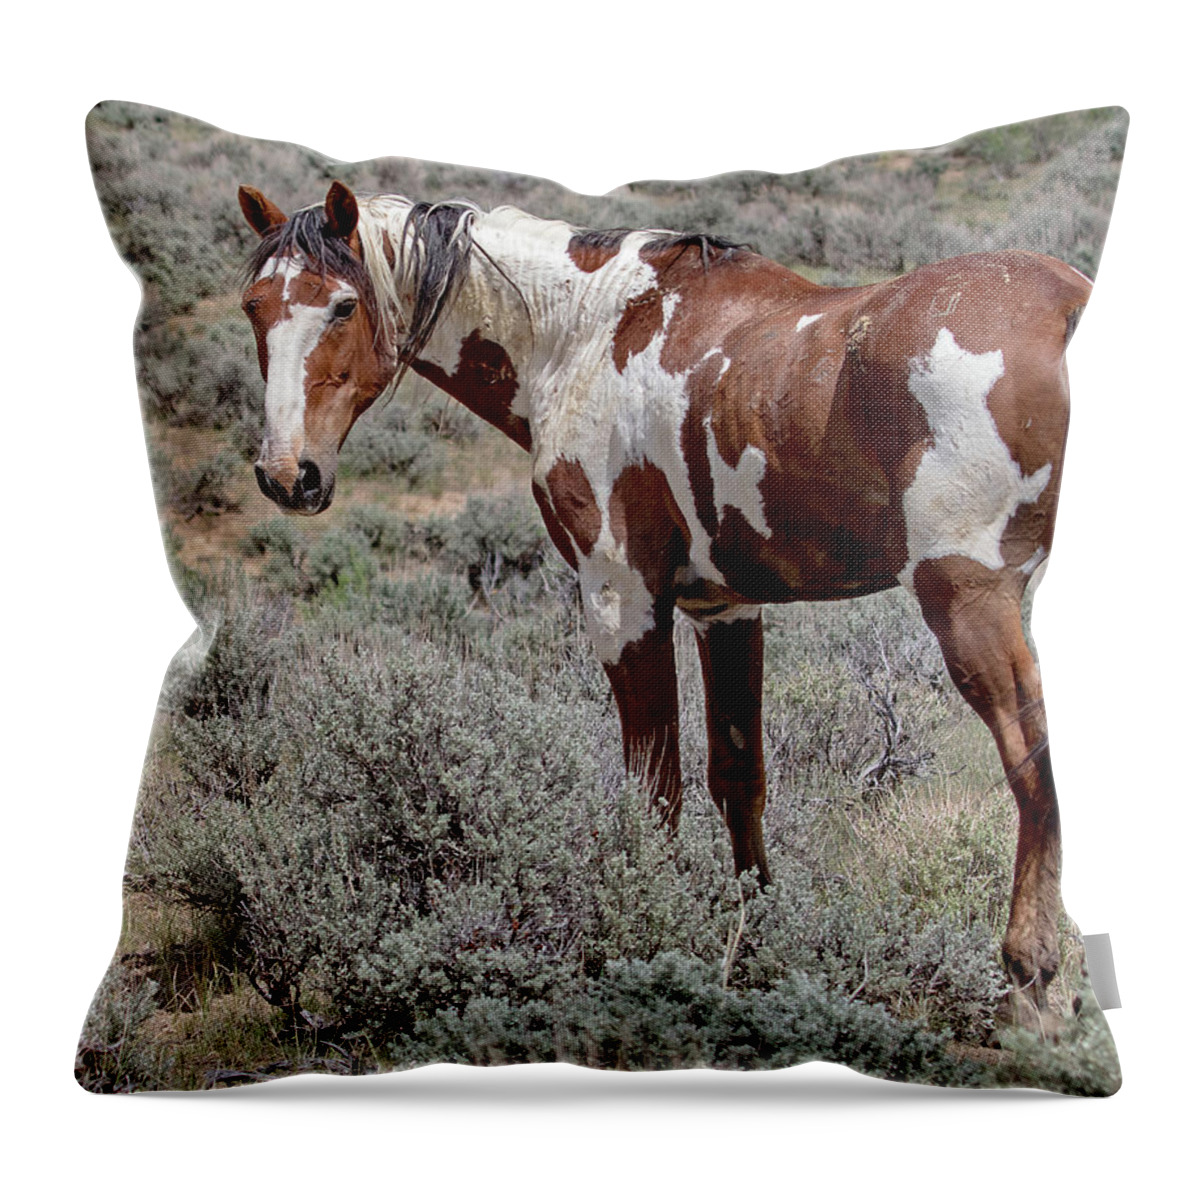 Picasso Throw Pillow featuring the photograph Picasso of Sand Wash Basin #2 by Mindy Musick King